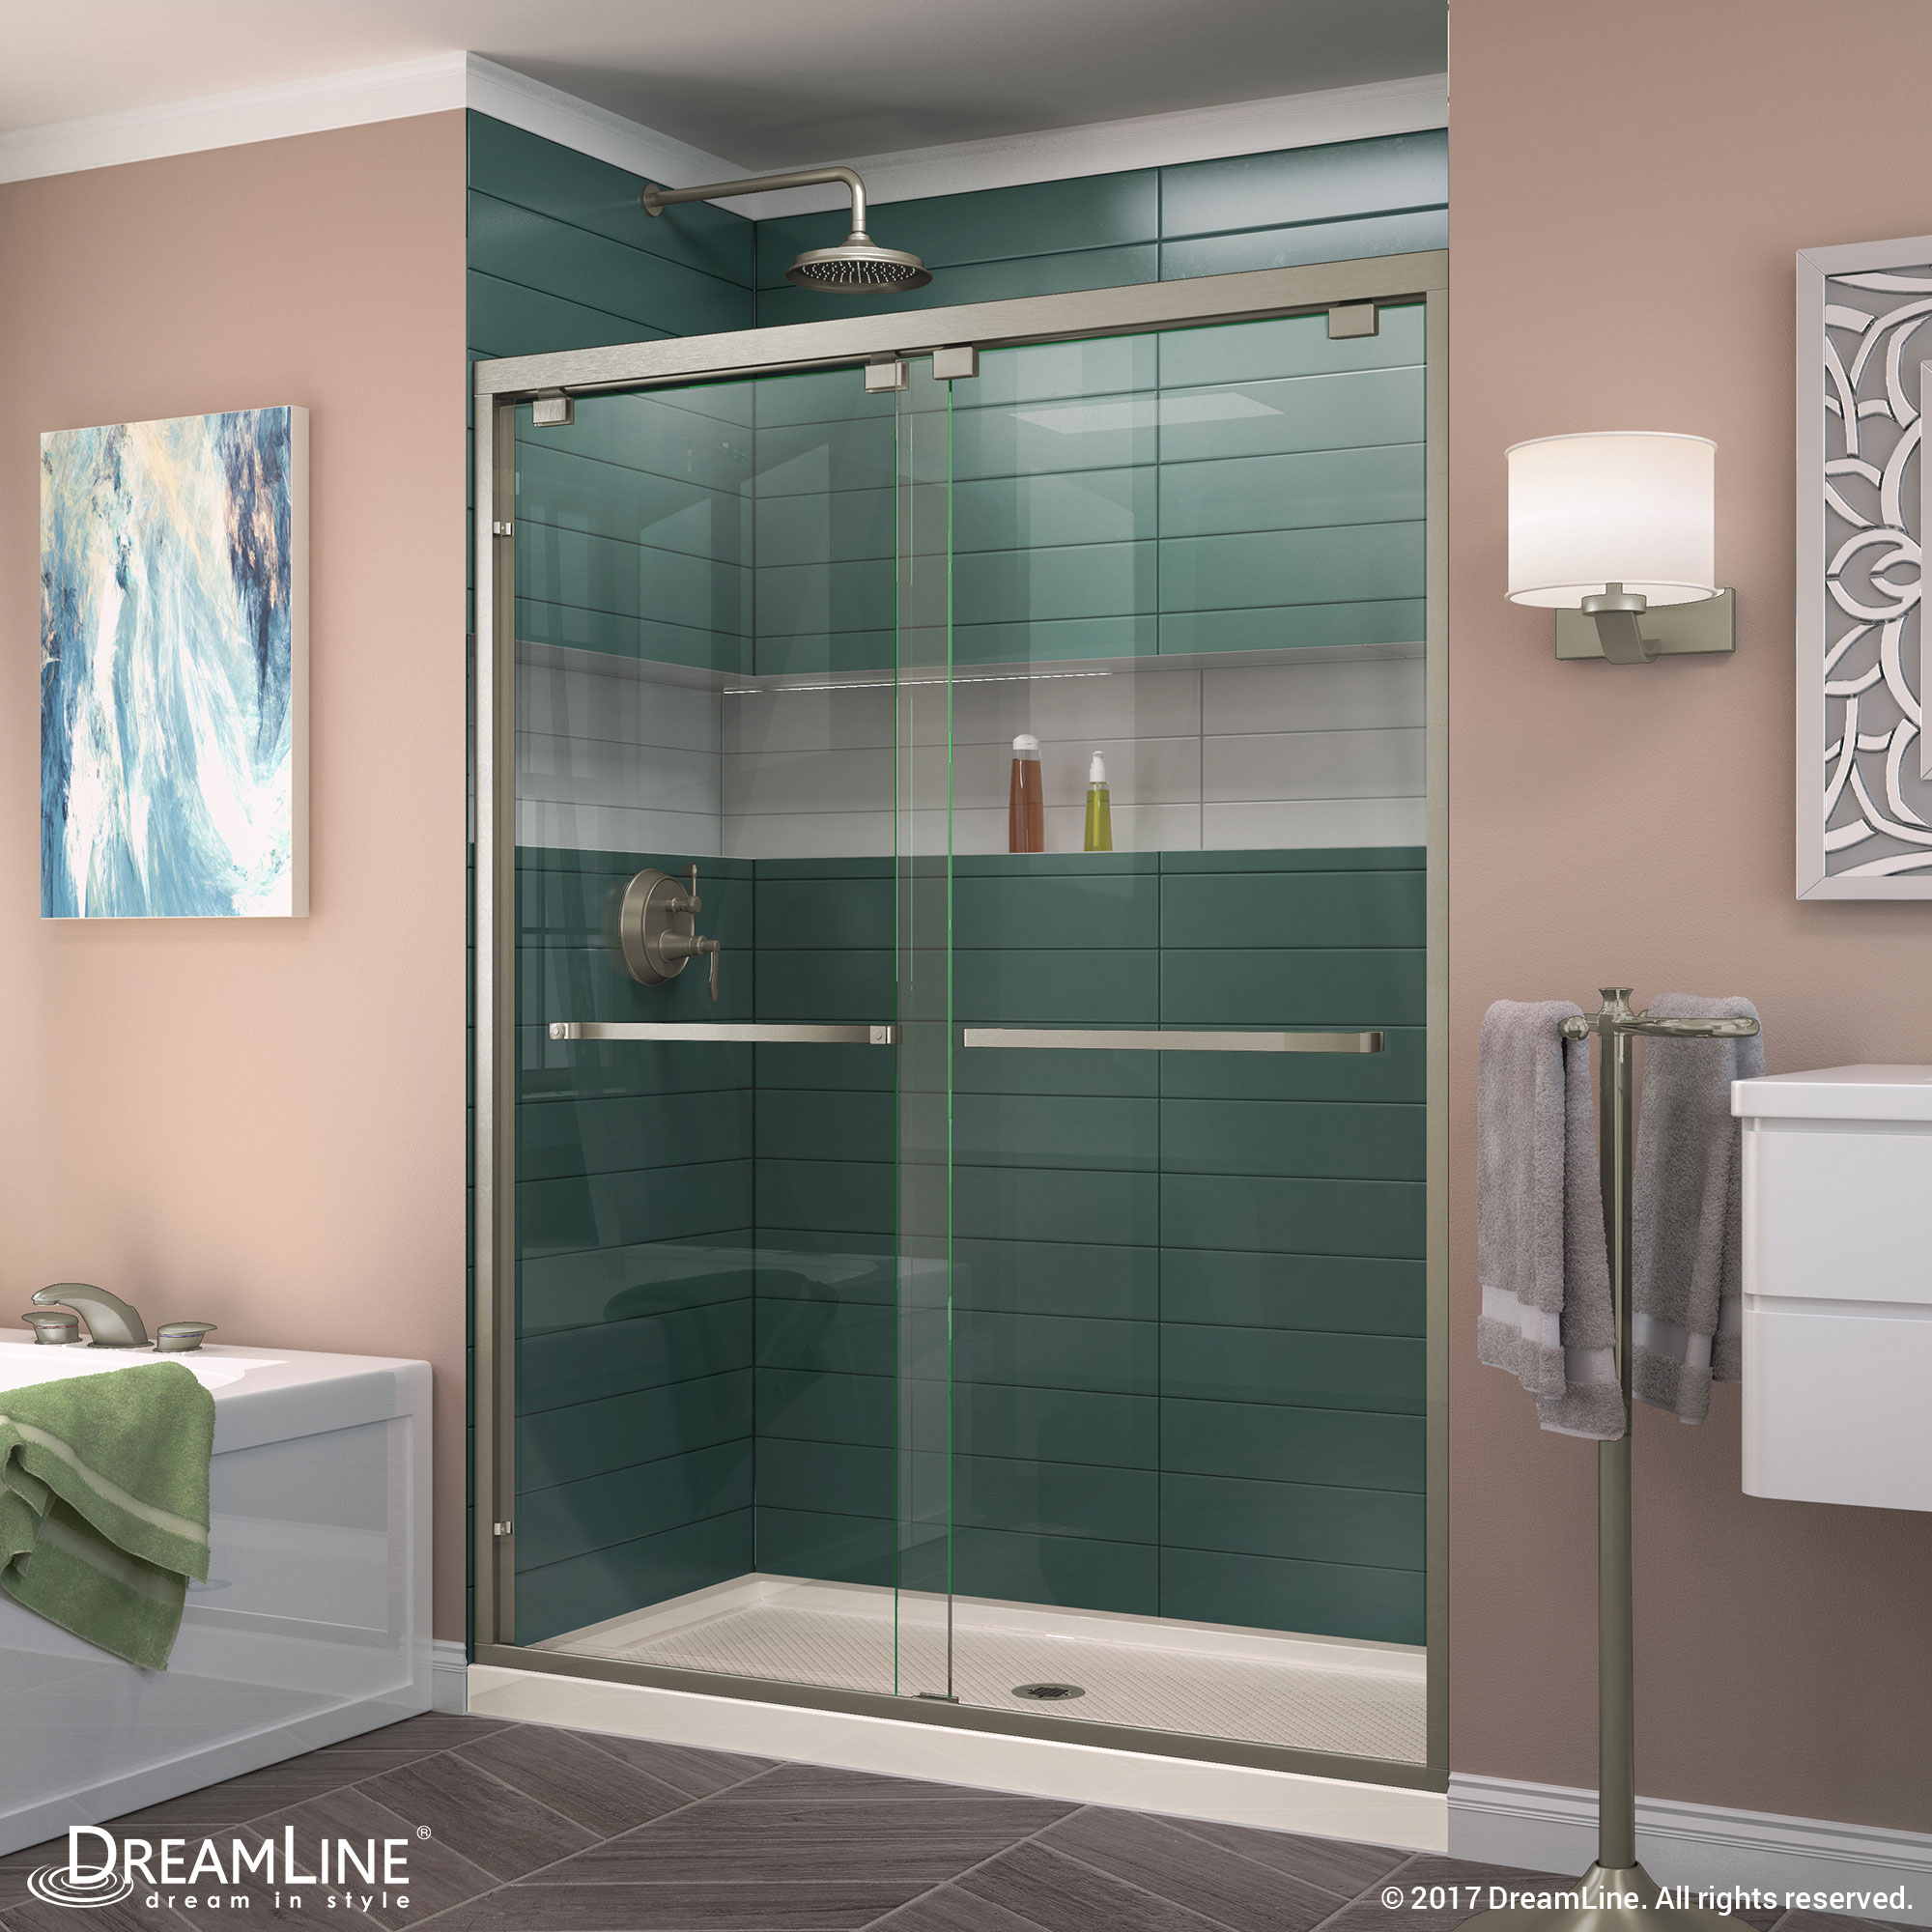 DreamLine Encore 36 in. D x 48 in. W x 78 3/4 in. H Bypass Shower Door in Chrome with Center Drain Biscuit Base Kit